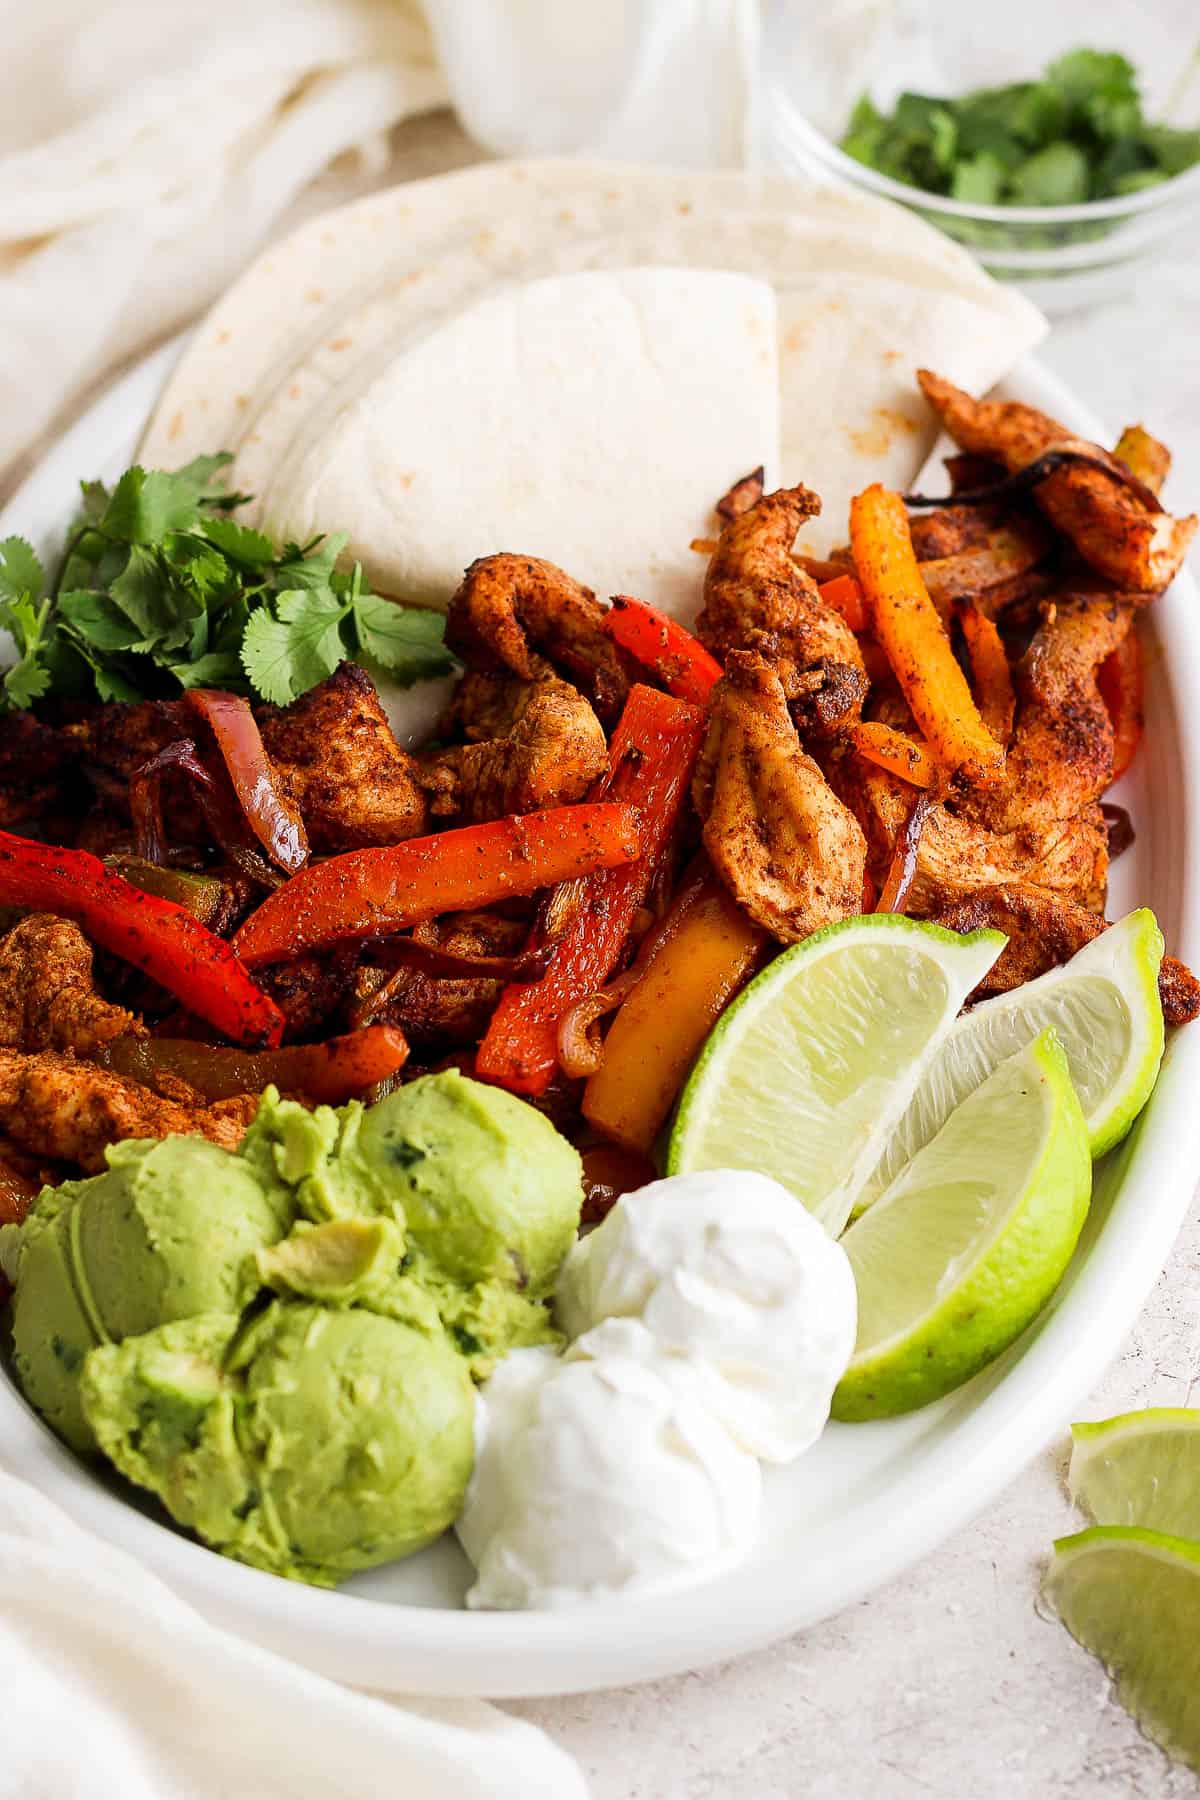 Plated air fryer chicken fajitas with limes, guacamole, and tortillas. 